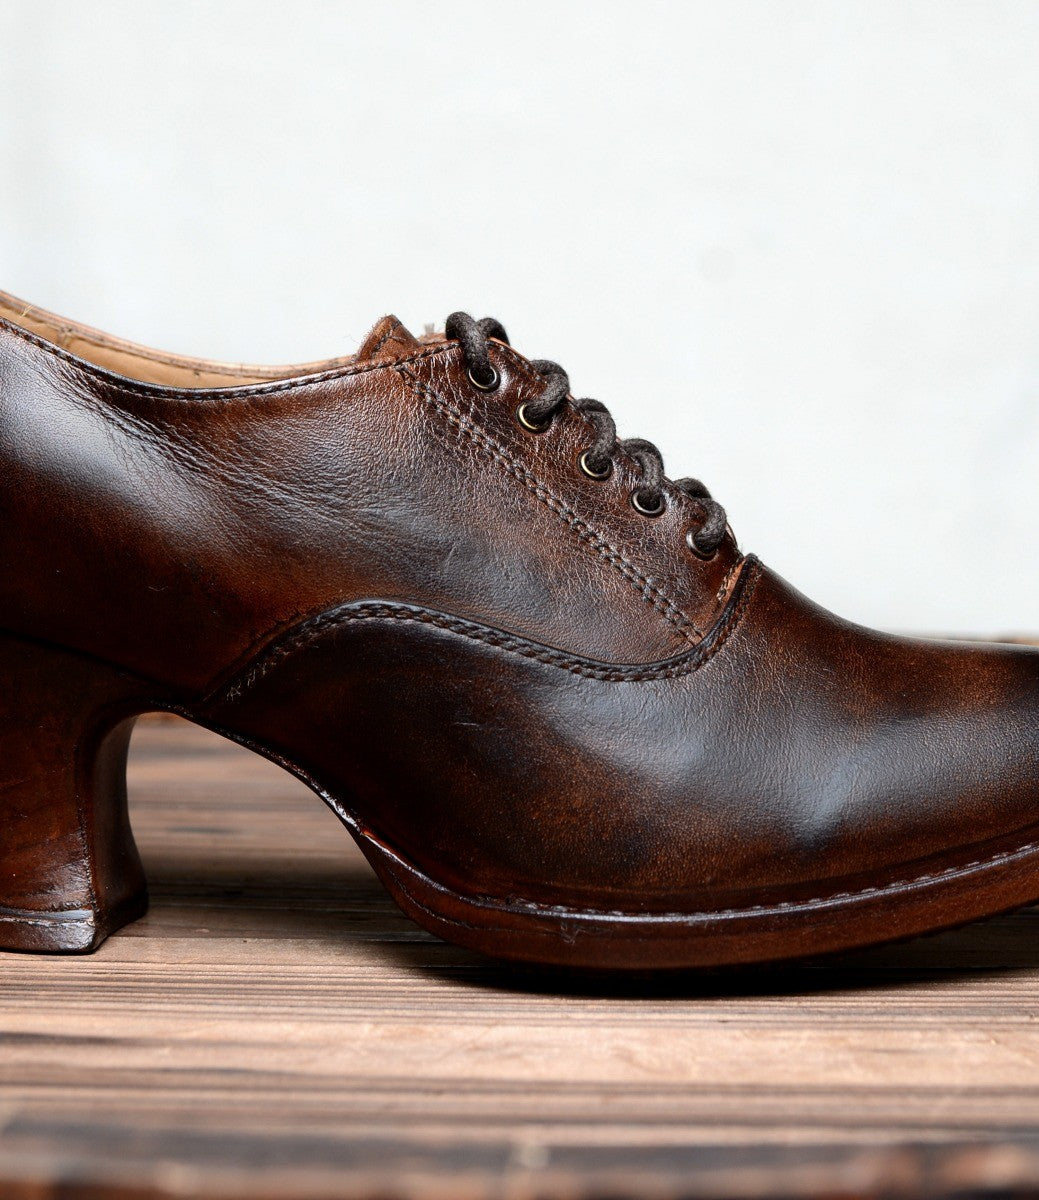 Victorian Style Leather Lace-Up Shoes in Teak Rustic